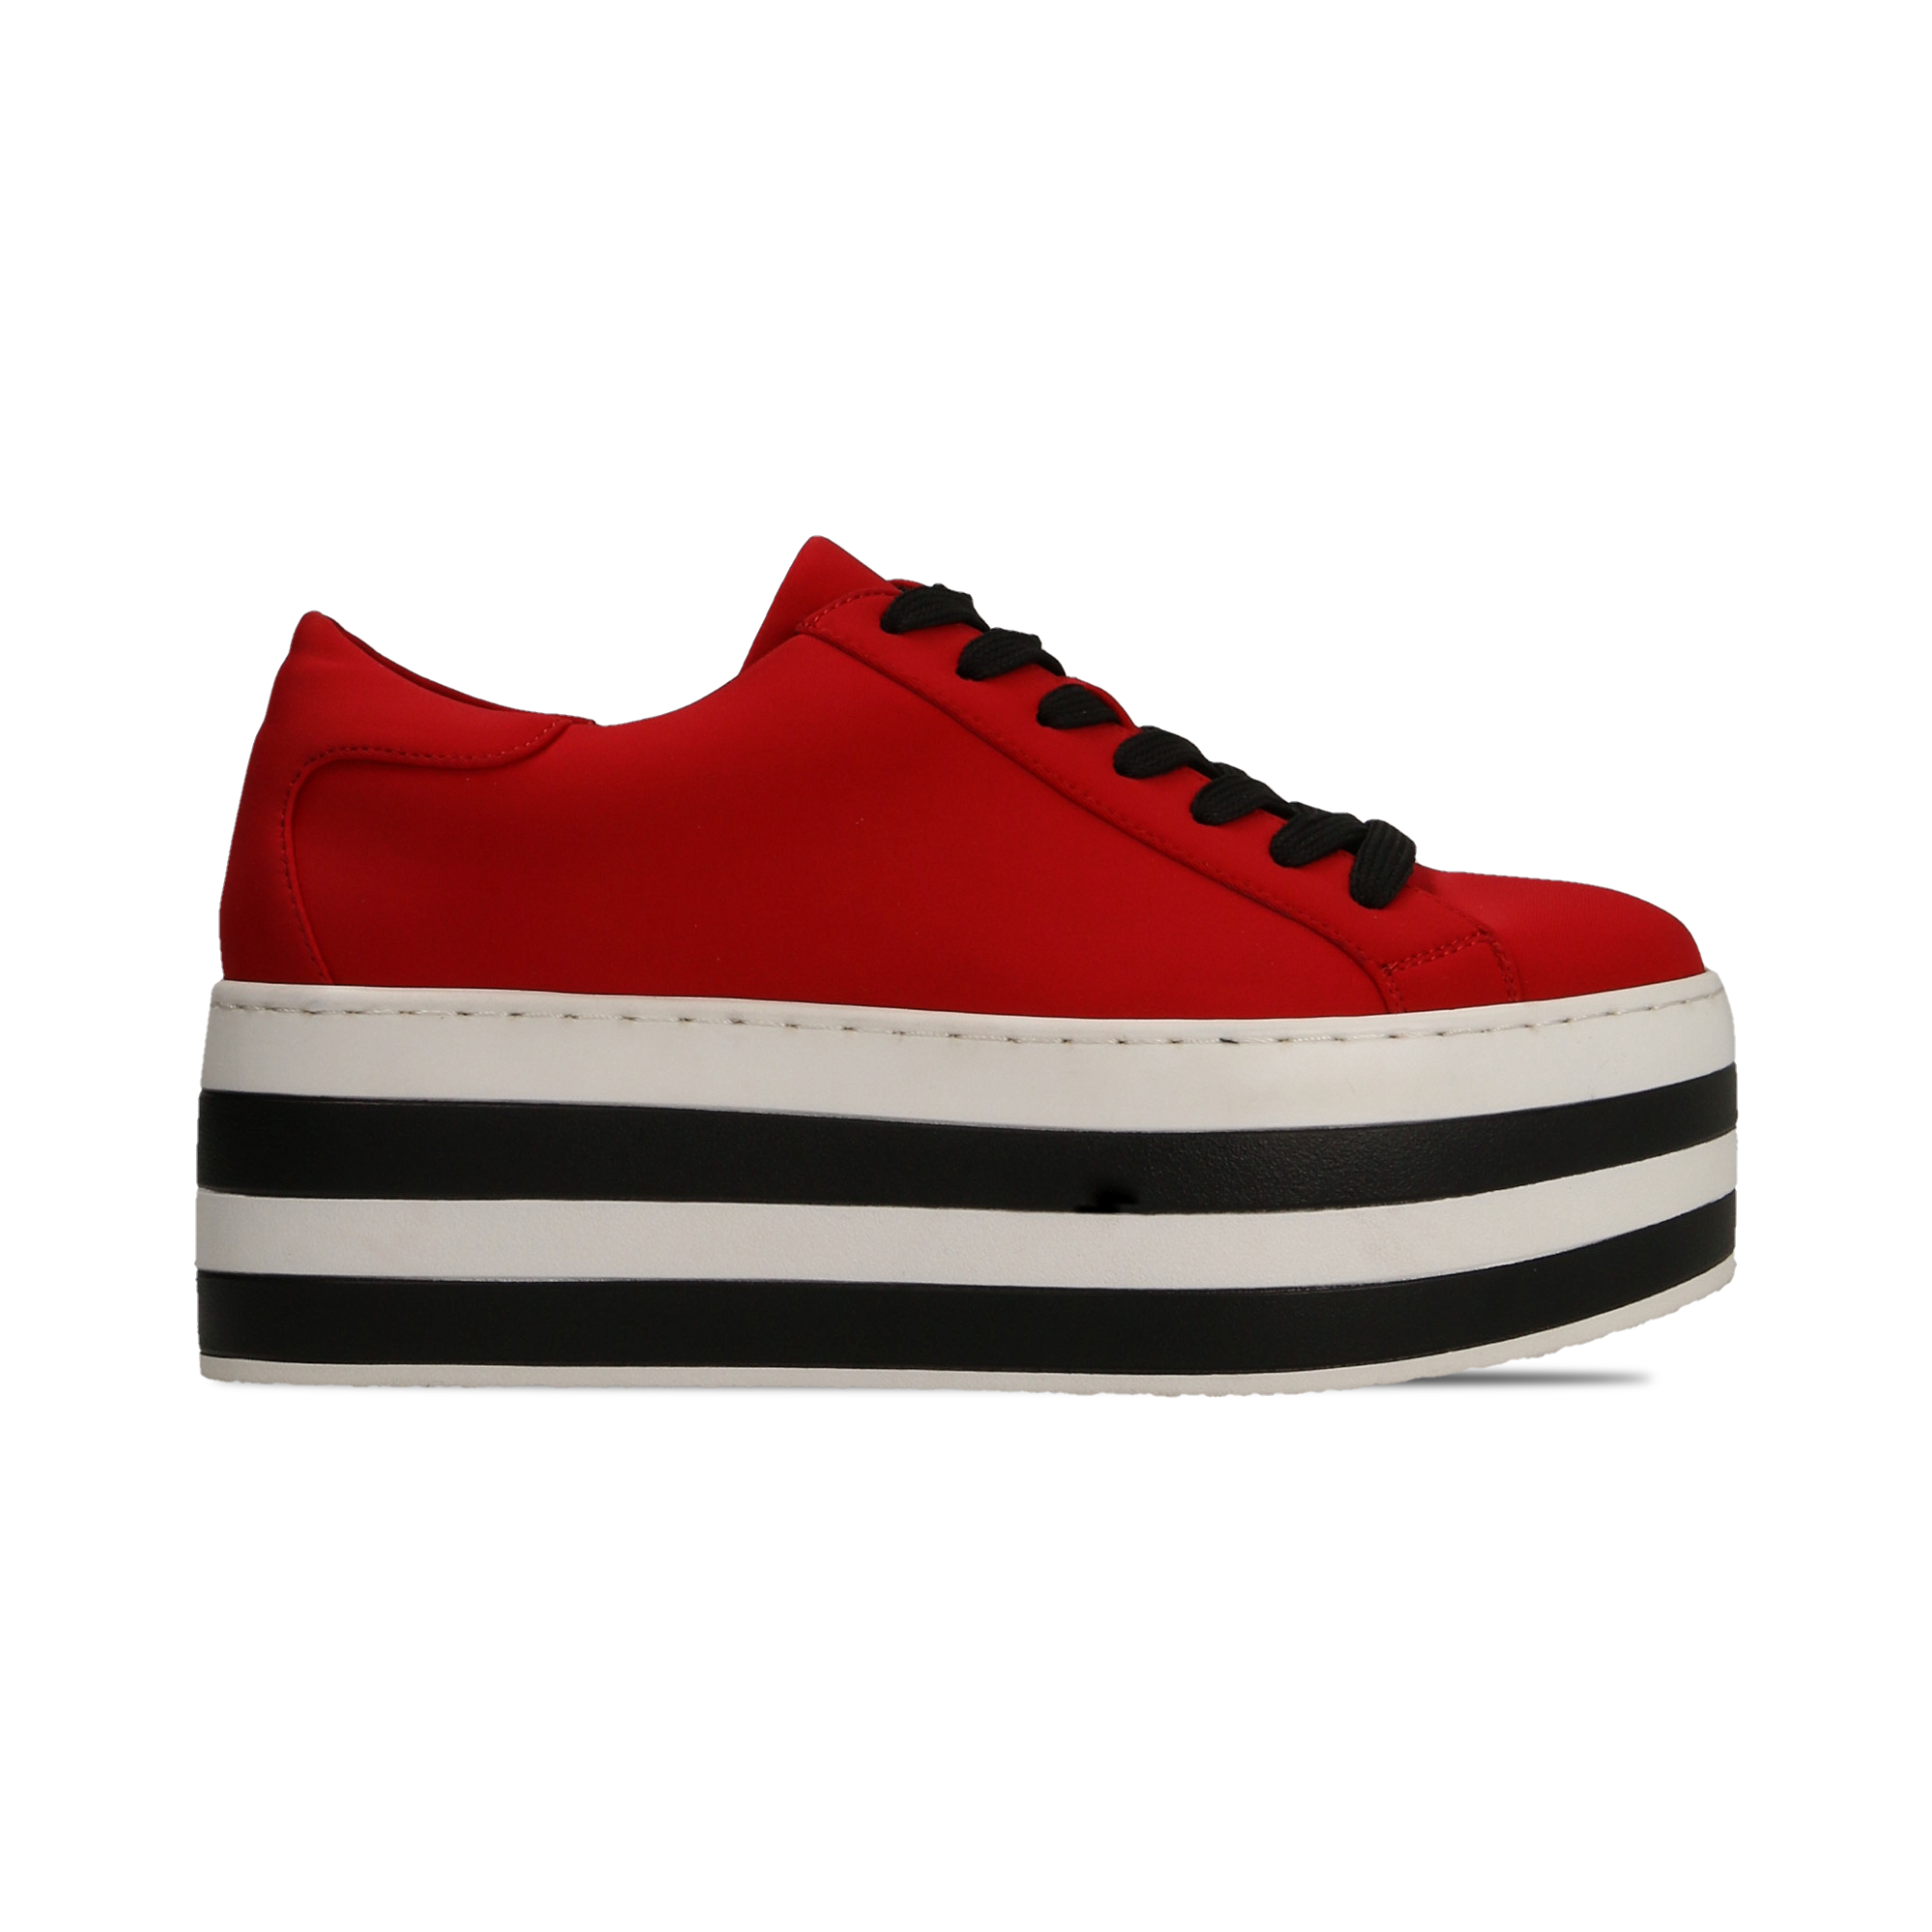 Sneakers Rosse Donna Tacco 6 Cm - Cod. 12A777615LYROSS | Primadonna  Collection